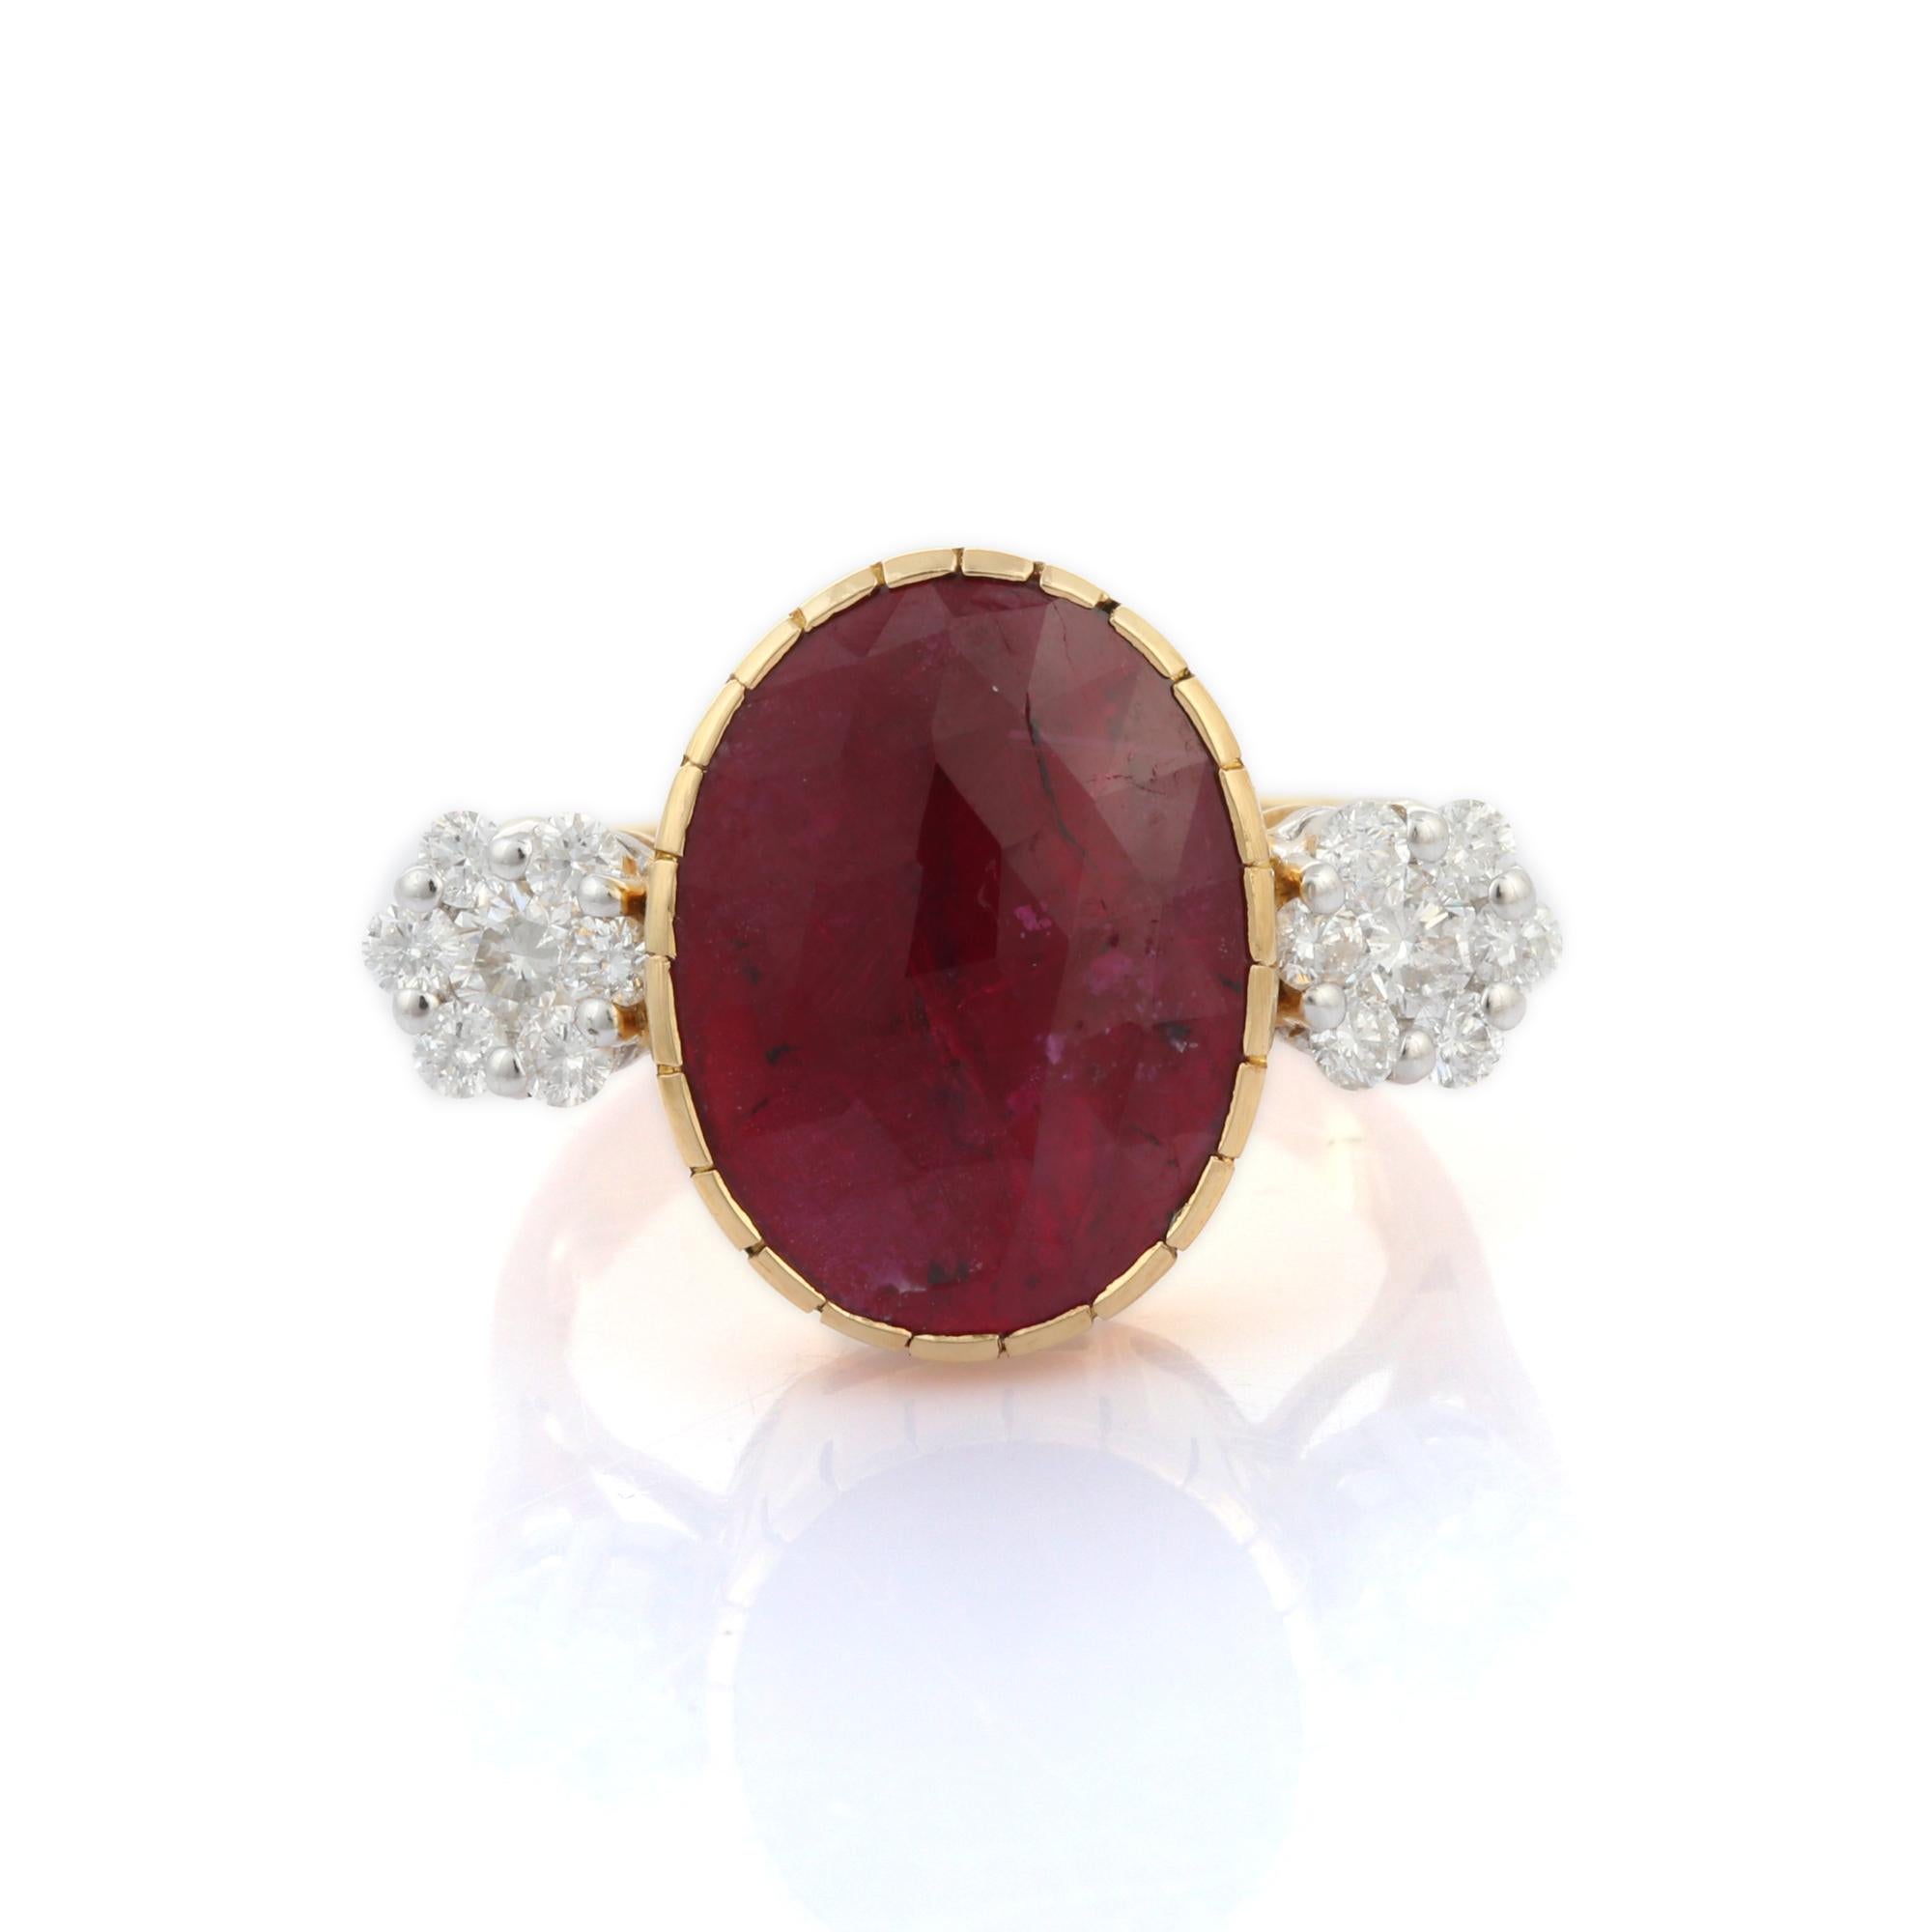 For Sale:  2.65 Carat Oval Cut Ruby Diamond Engagement Ring in 18 Karat Yellow Gold 14